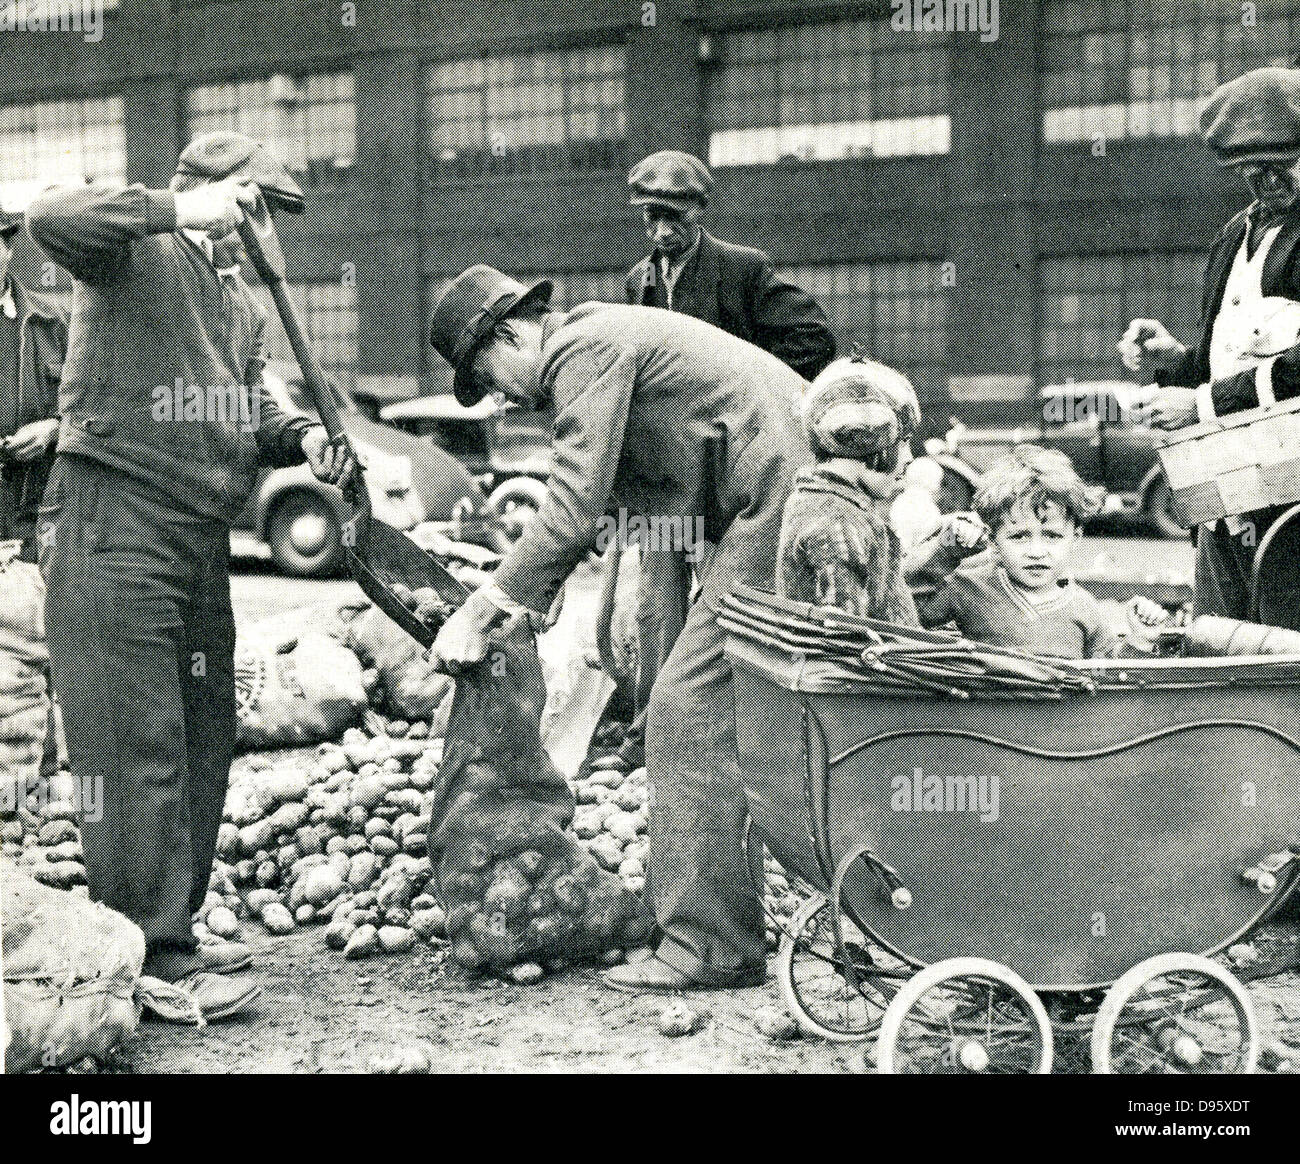 The American Depression - 1930s. Children faced starvation when local relief funds were exhausted and there was no work for their parents. Emergency food depots were set up.  Here two children in Cleveland wait while their father collects a ration of potatoes. Stock Photo